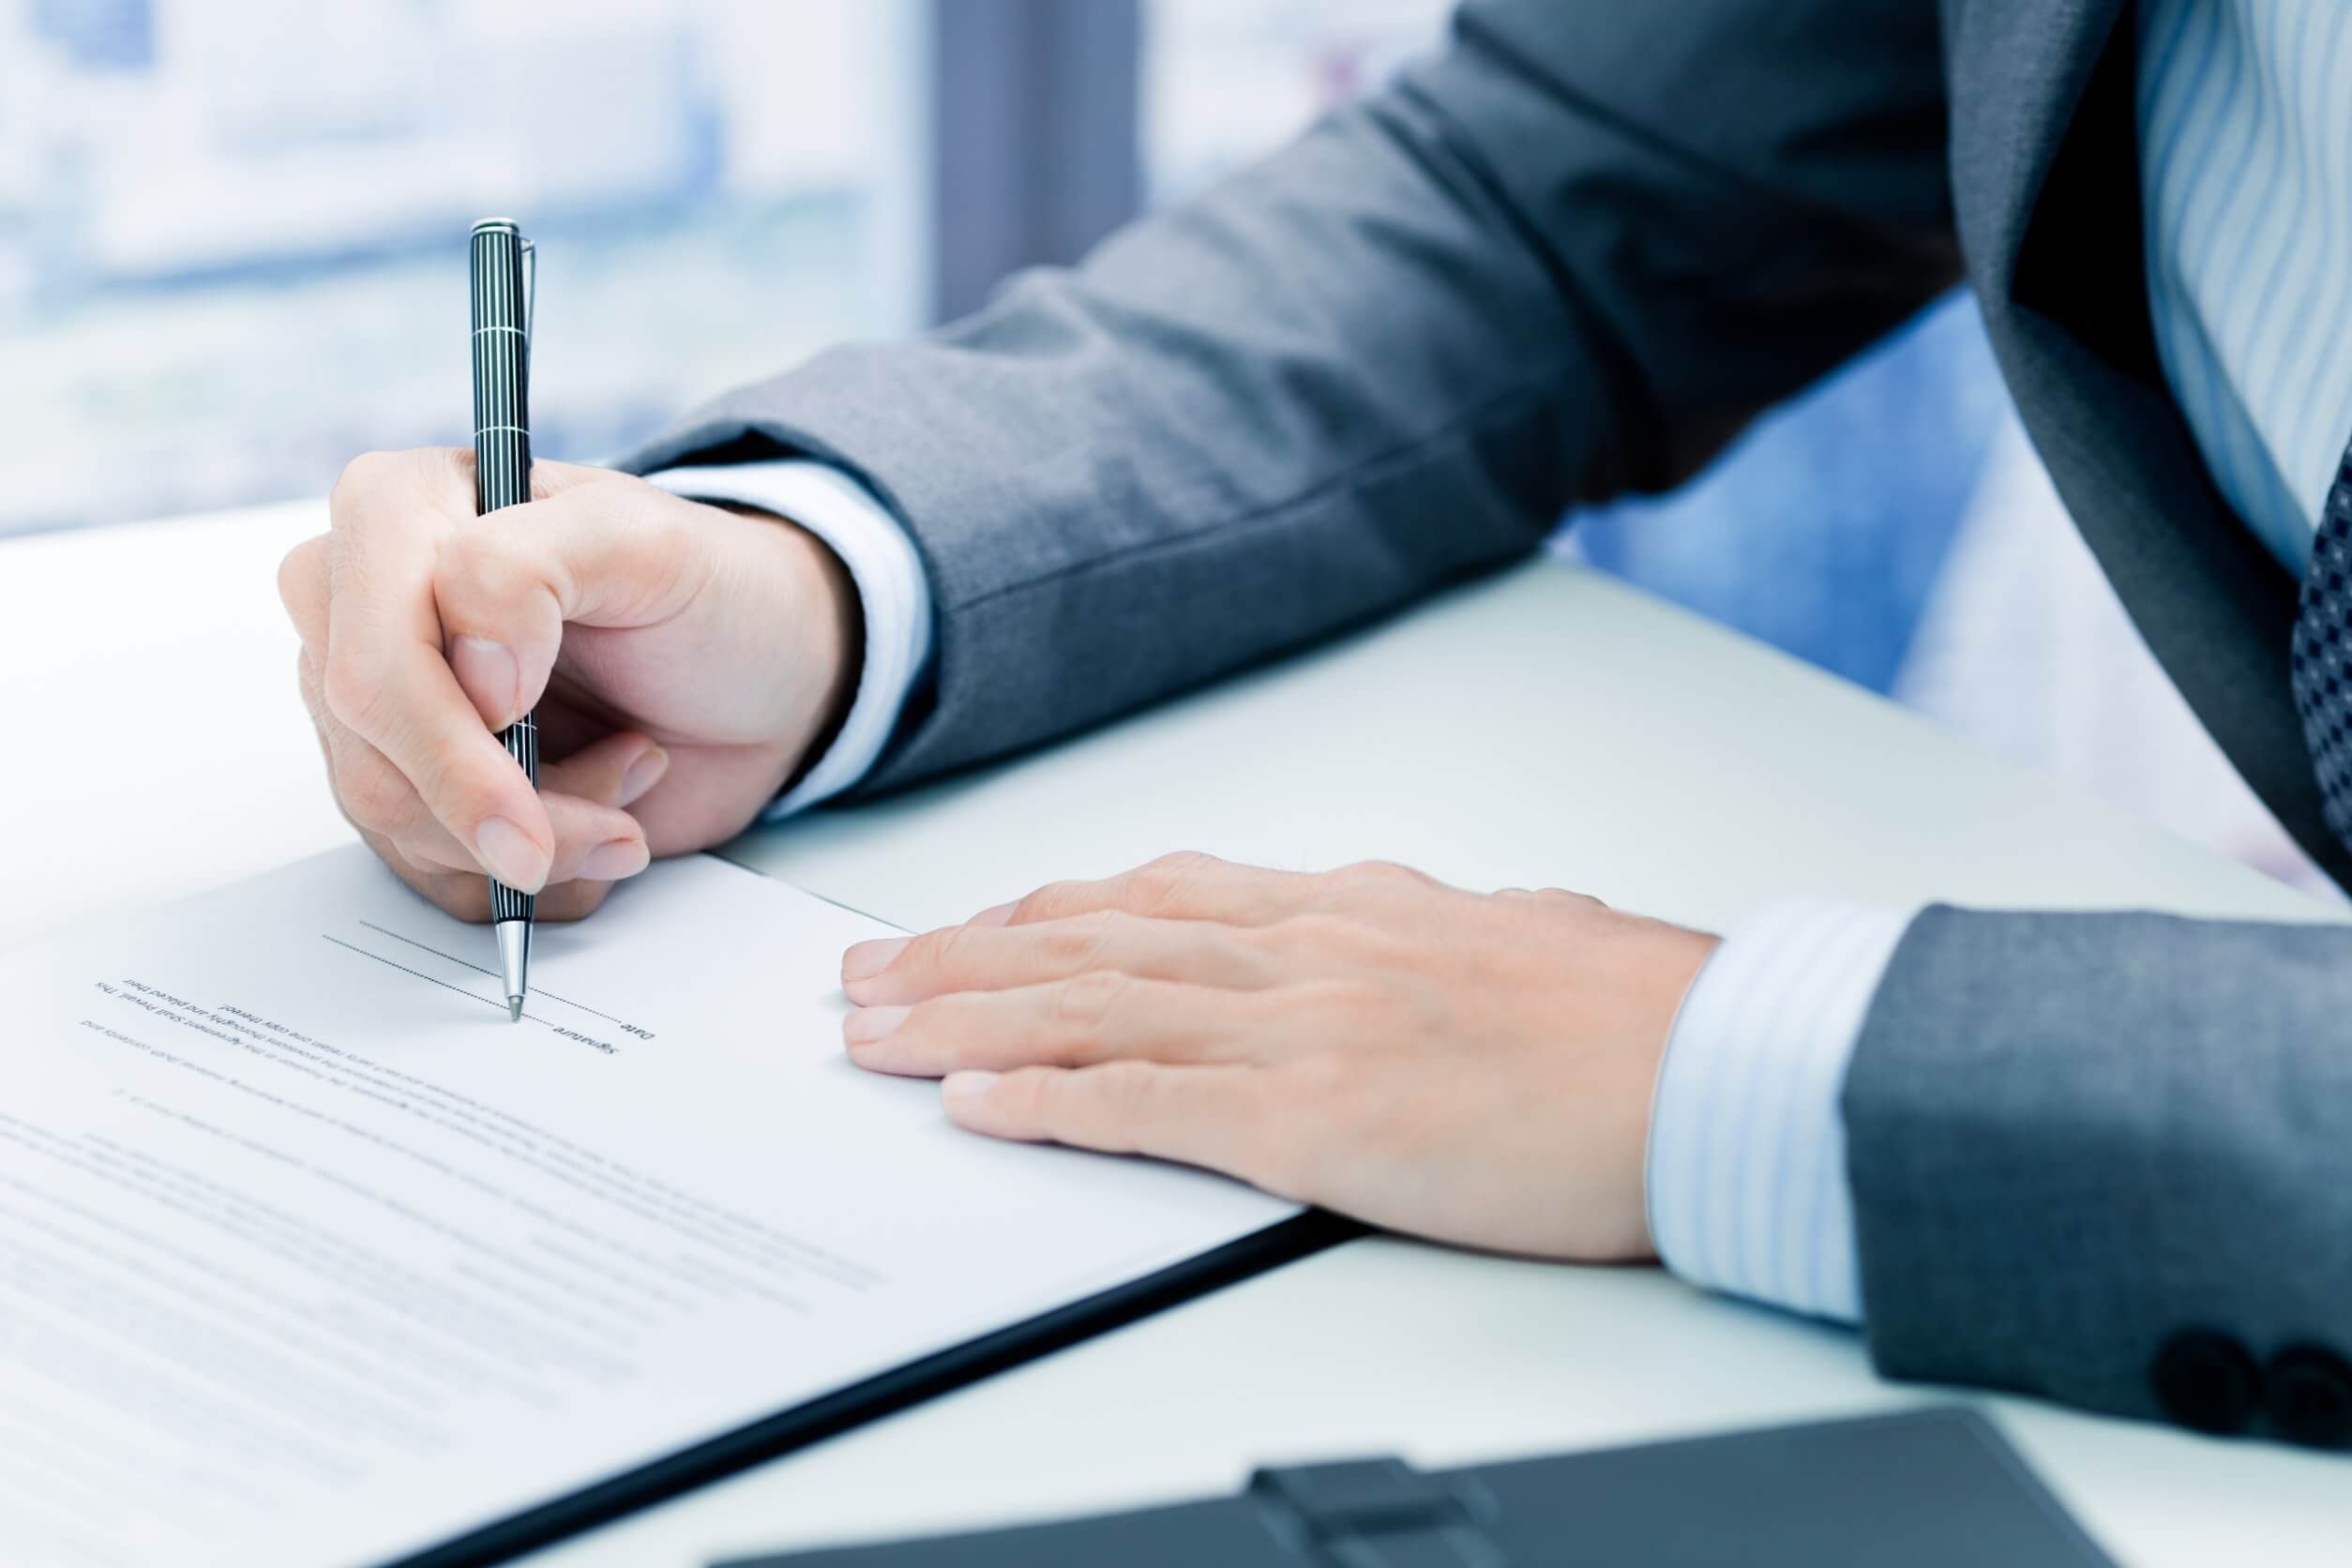 What Is a Signature Loan and How Does It Work?